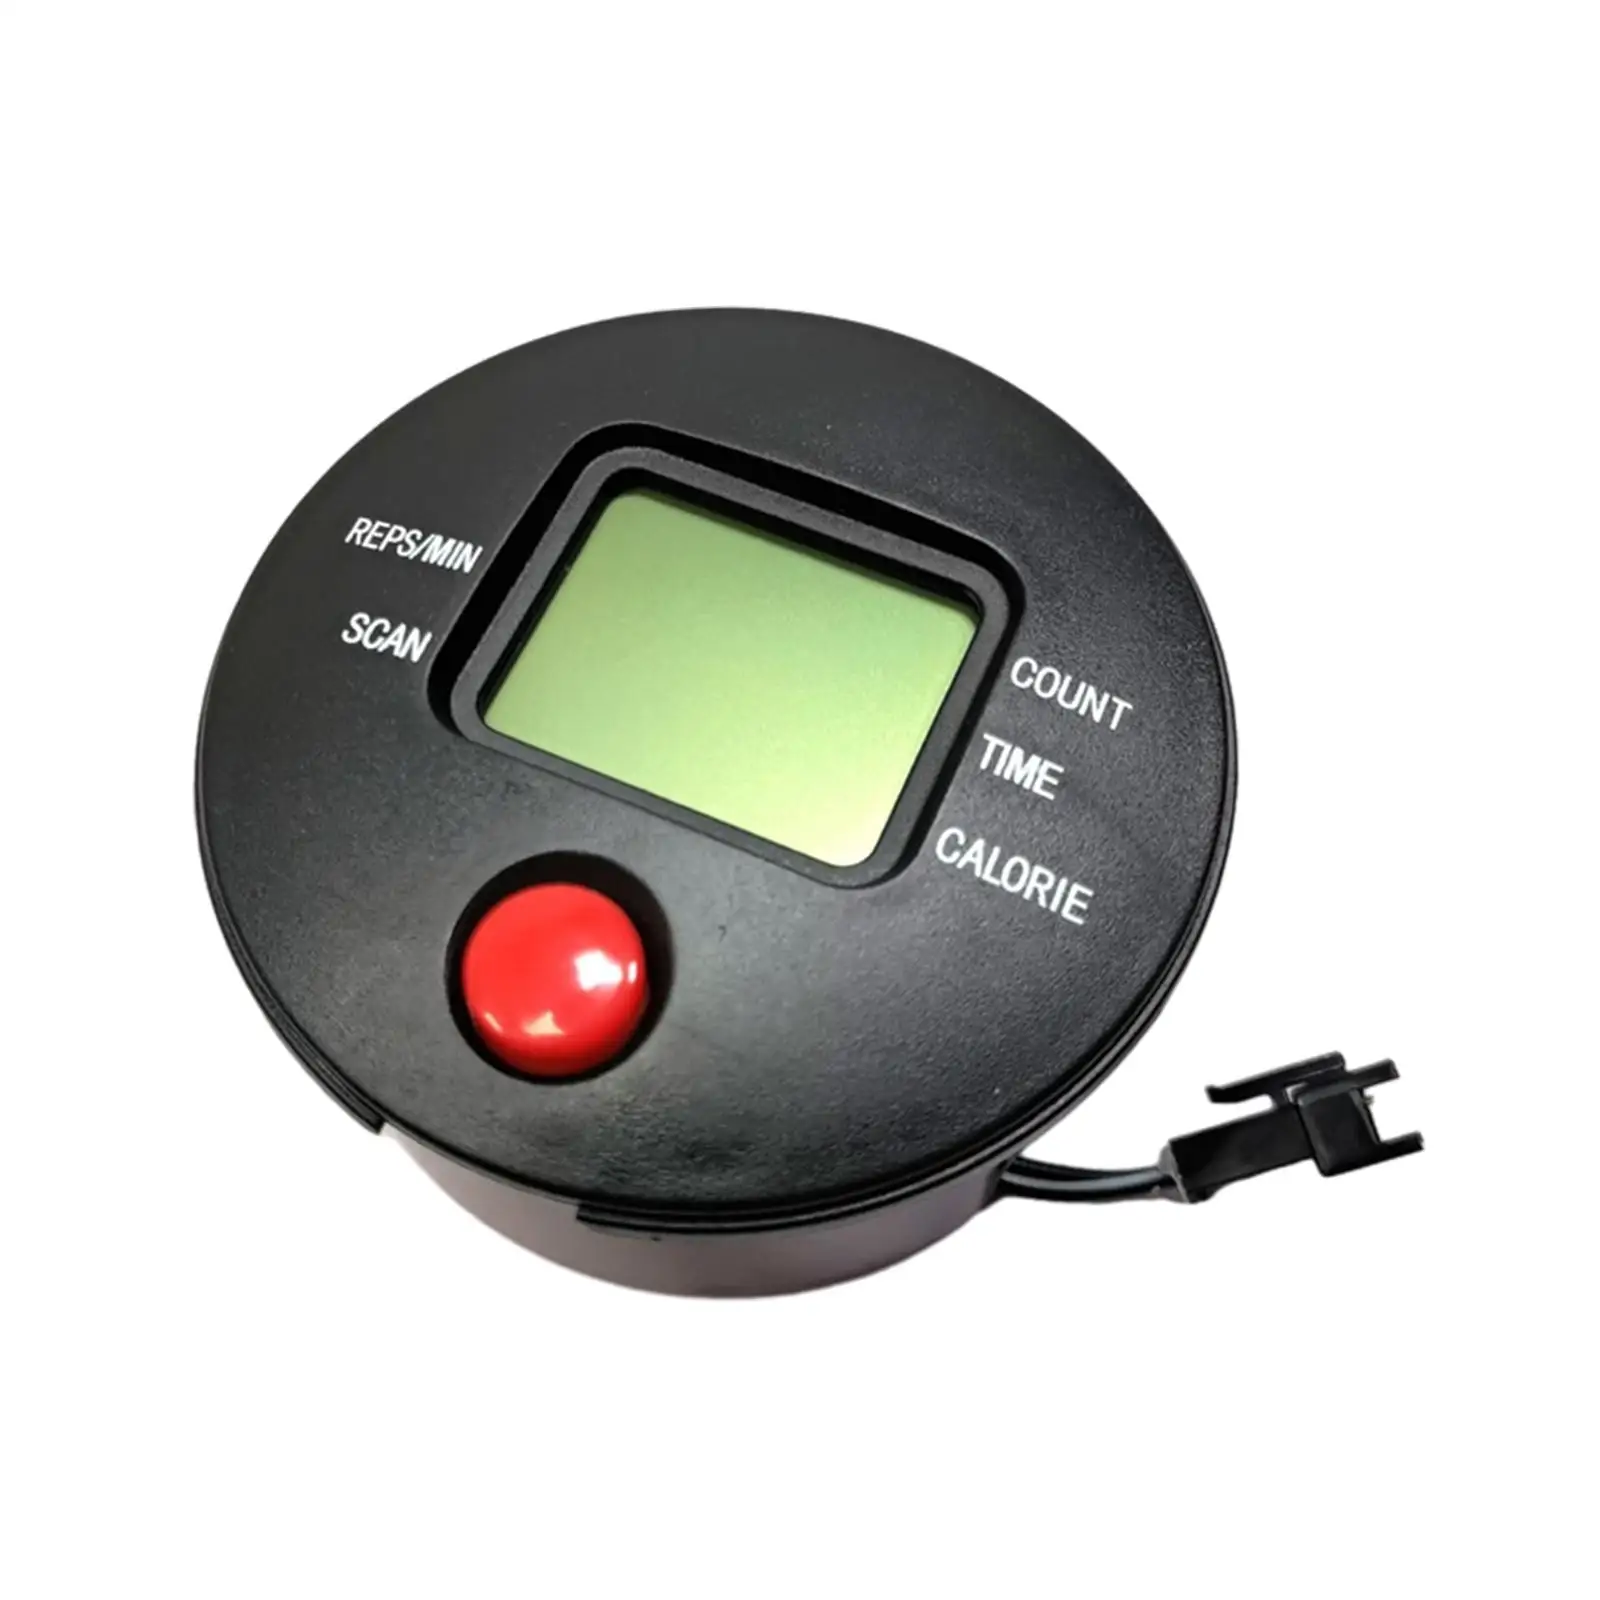 Monitor Speedometer Stepper, Stable Accs, LCD Measurement Riding Counter for